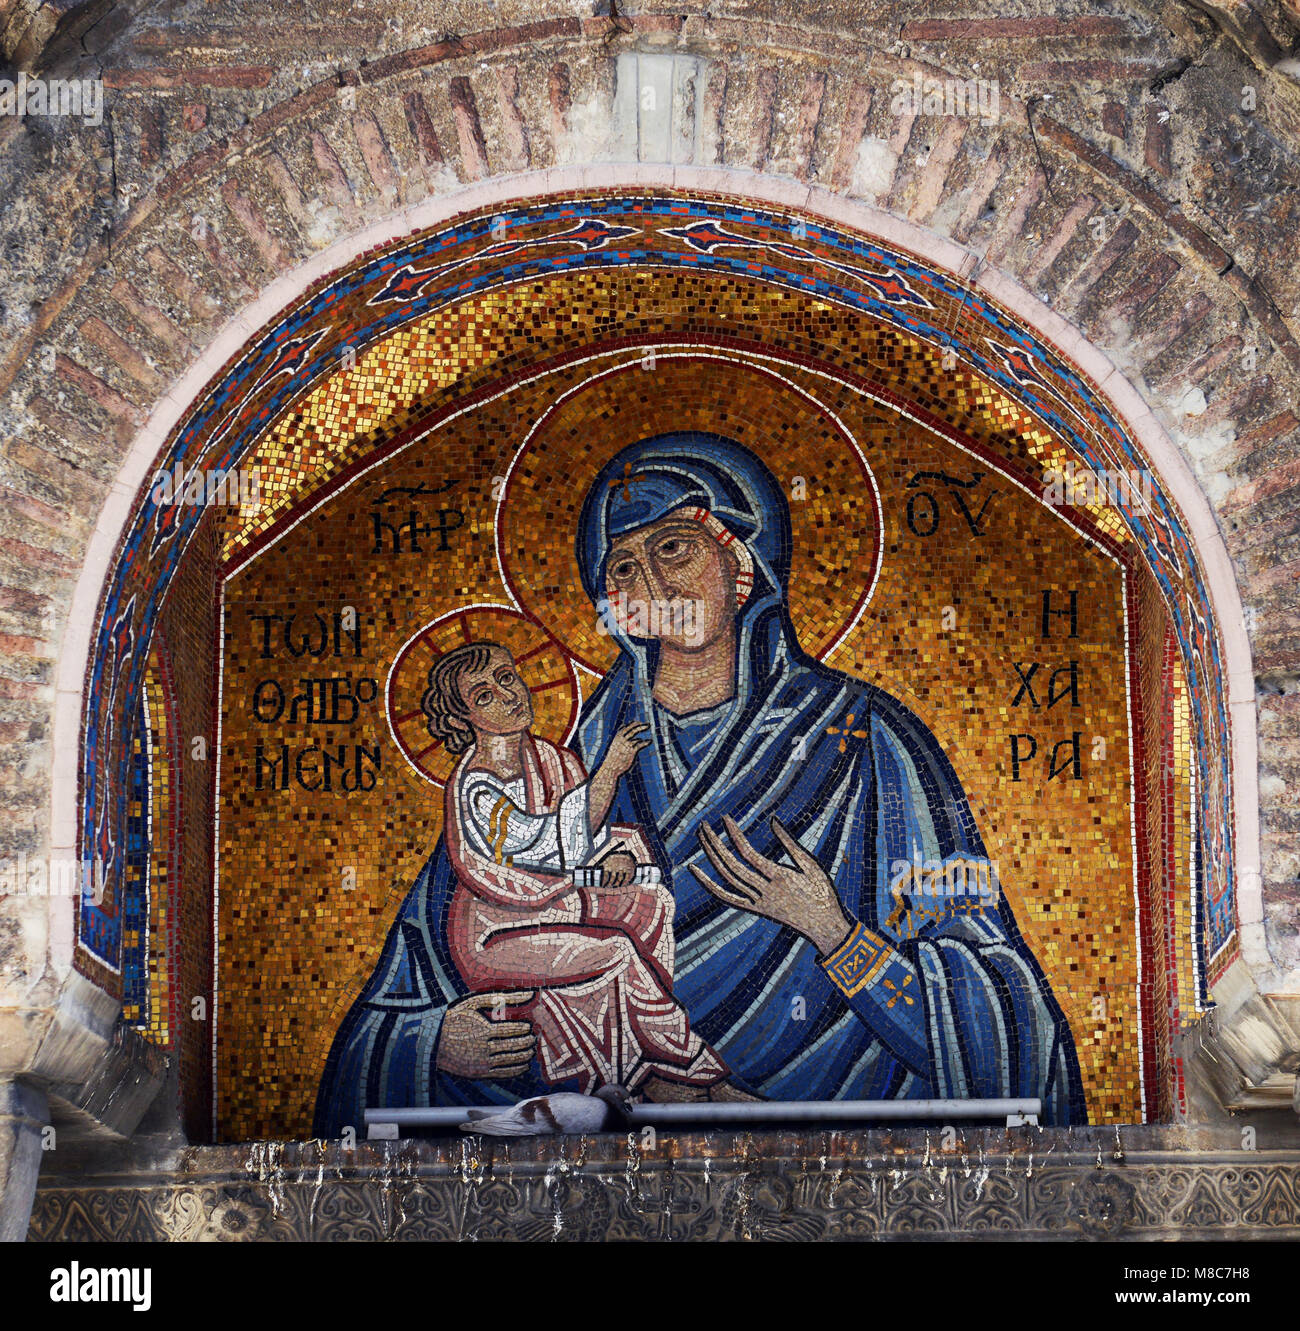 Byzantine Mosaic above the door of the Church of Panaghia Kapnikarea in Athen's city center. Stock Photo